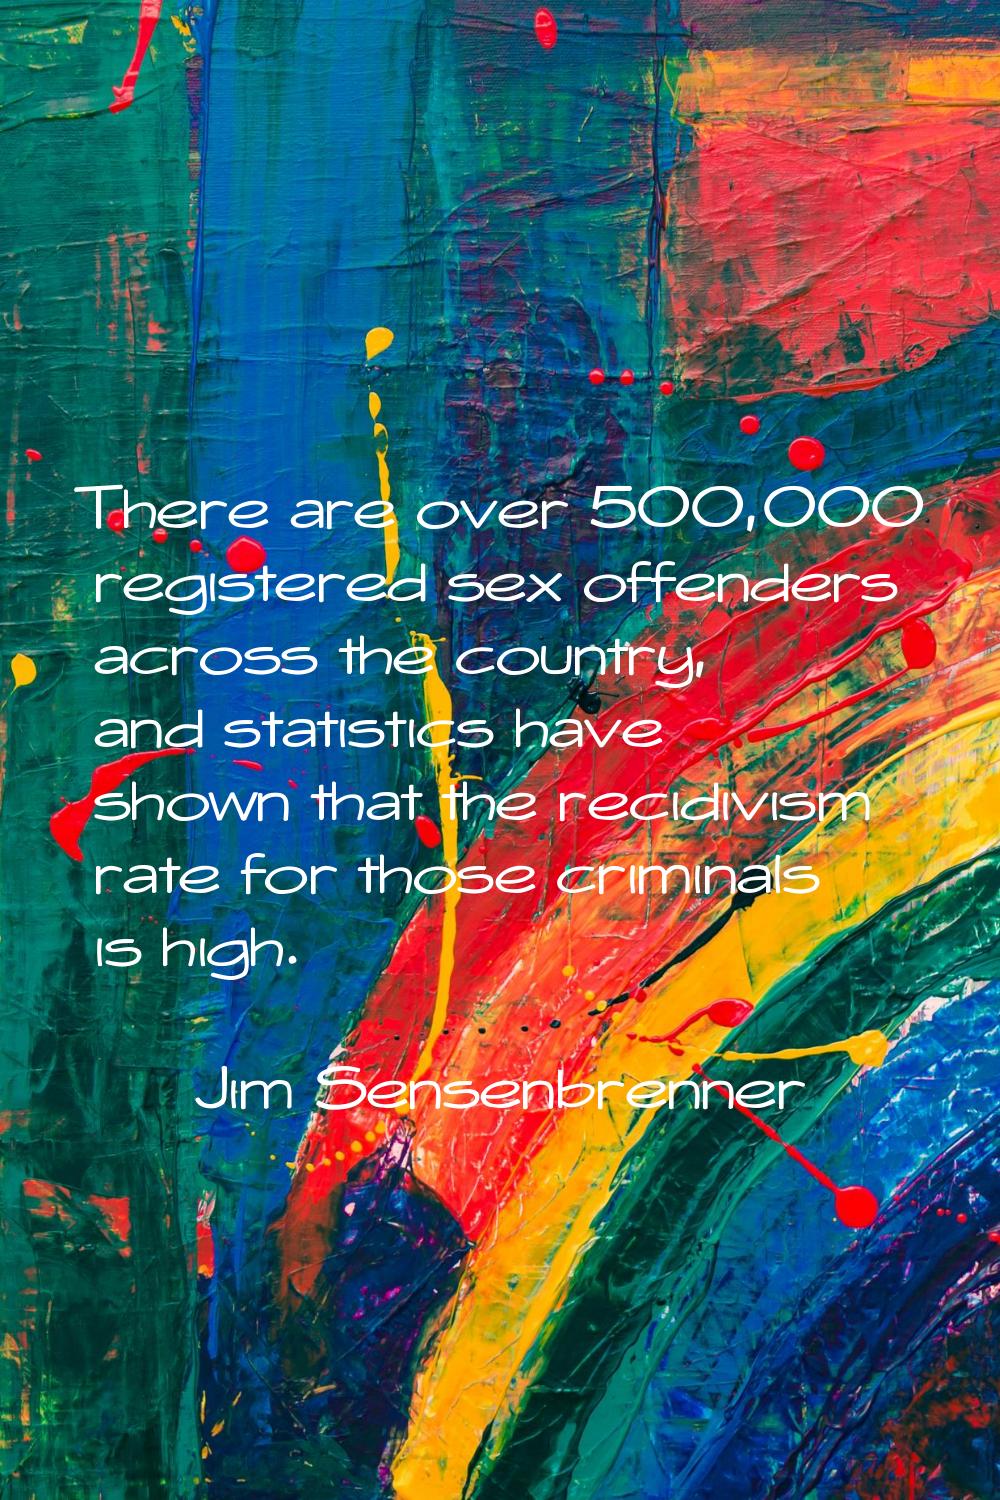 There are over 500,000 registered sex offenders across the country, and statistics have shown that 